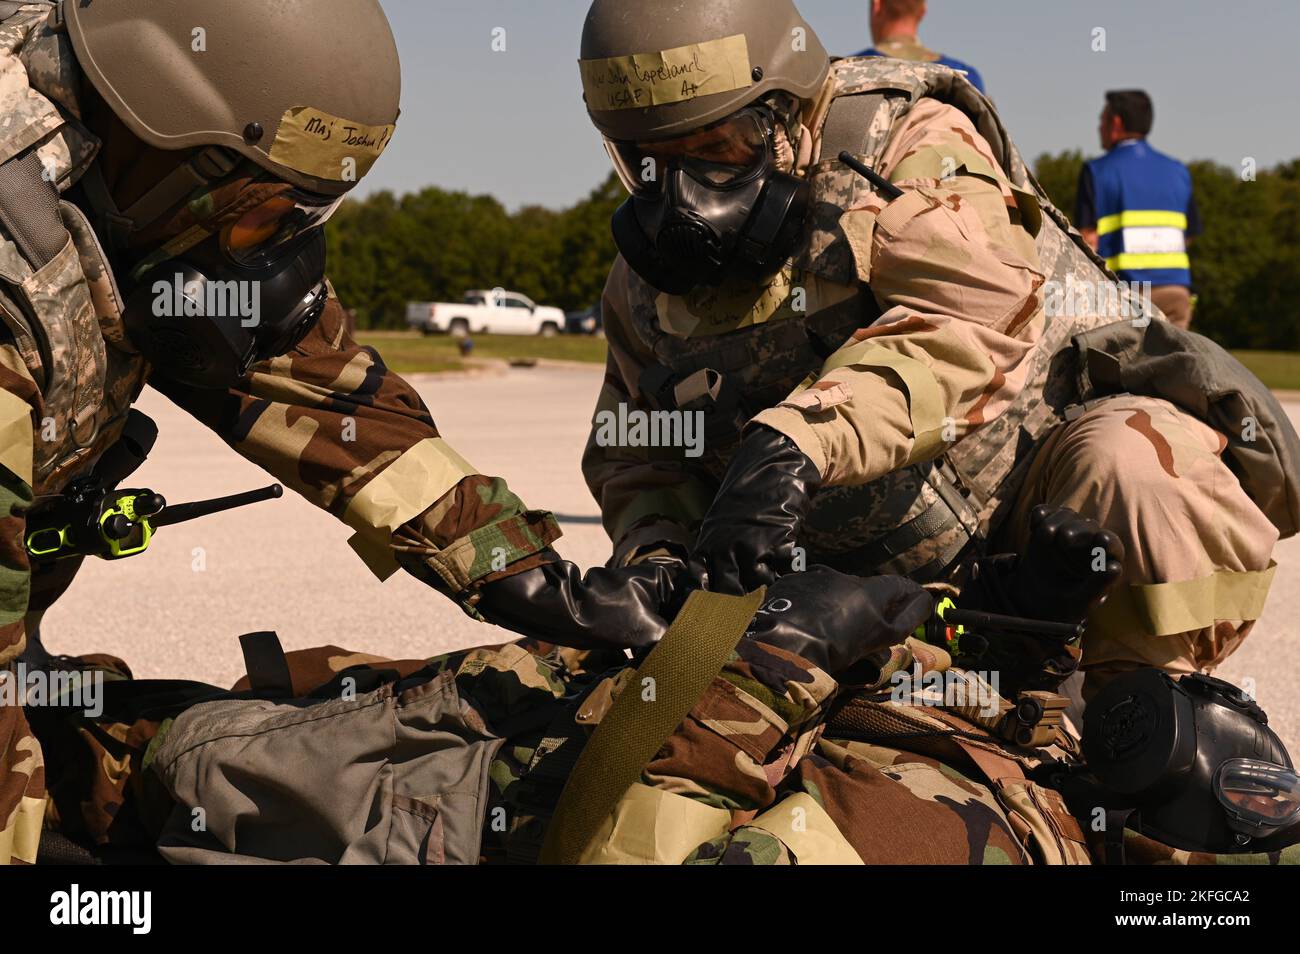 U.S. Air Force Airmen from the 509th Medical Group respond to a simulated injury during a CBRN exercise at Whiteman Air Force Base, Missouri, September 15, 2022. Airmen from the 509th Medical Group participated to strengthen their knowledge. Stock Photo